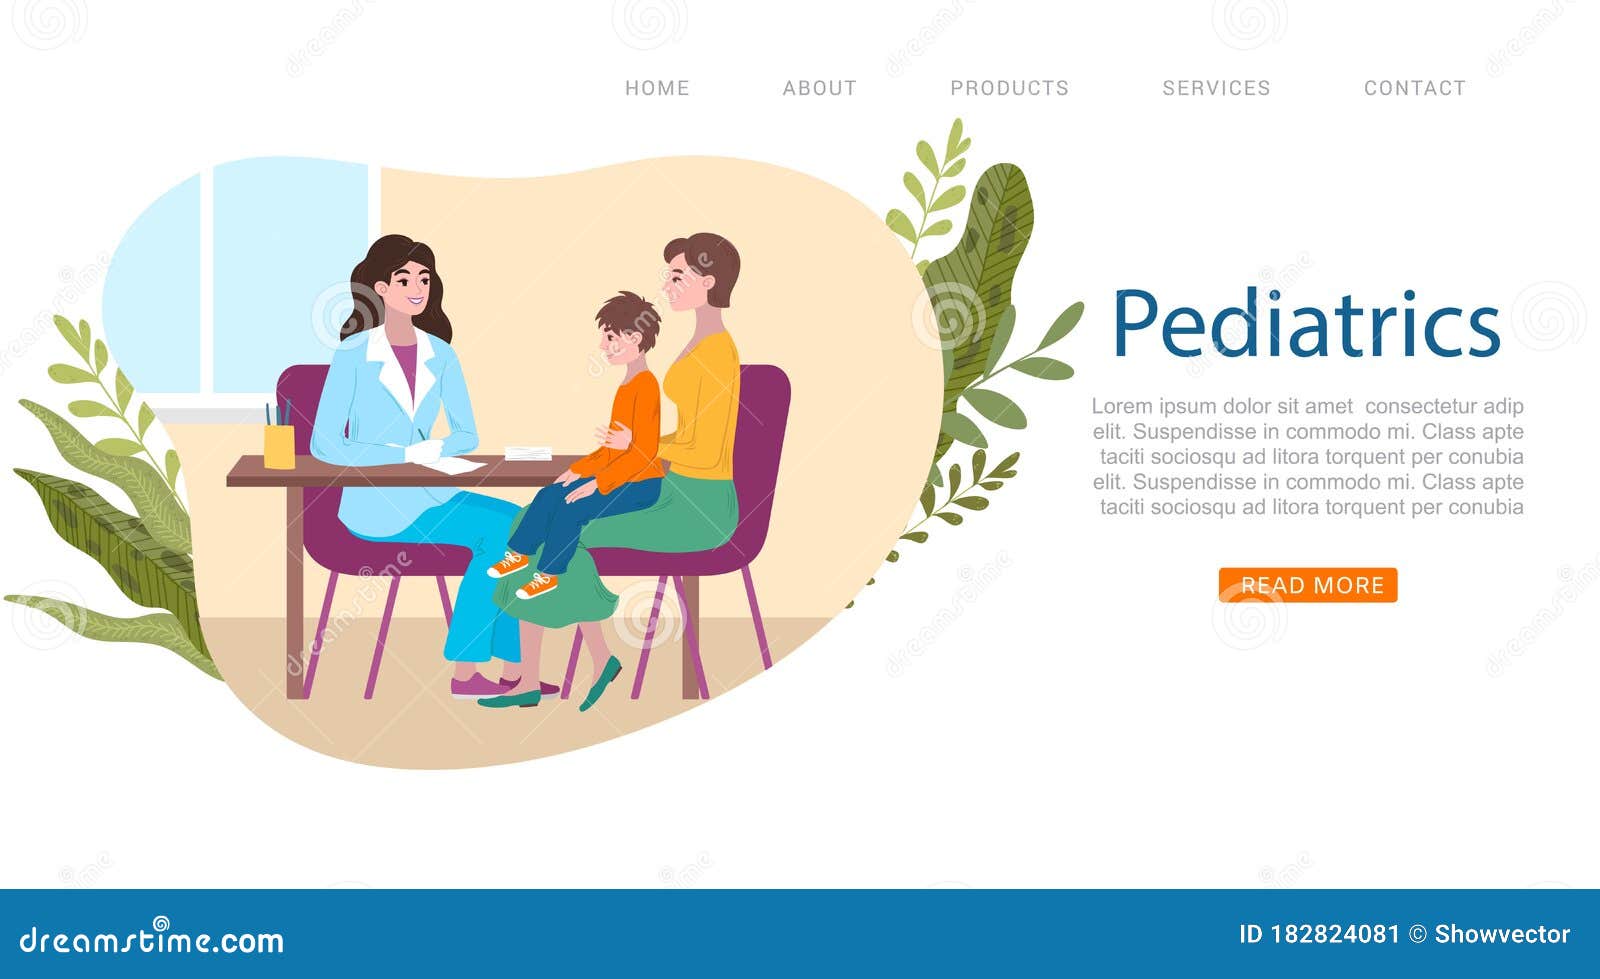 kids pediatrician doctor web banner, little patient with mother at pediatrist medical consultation, medics cartoon